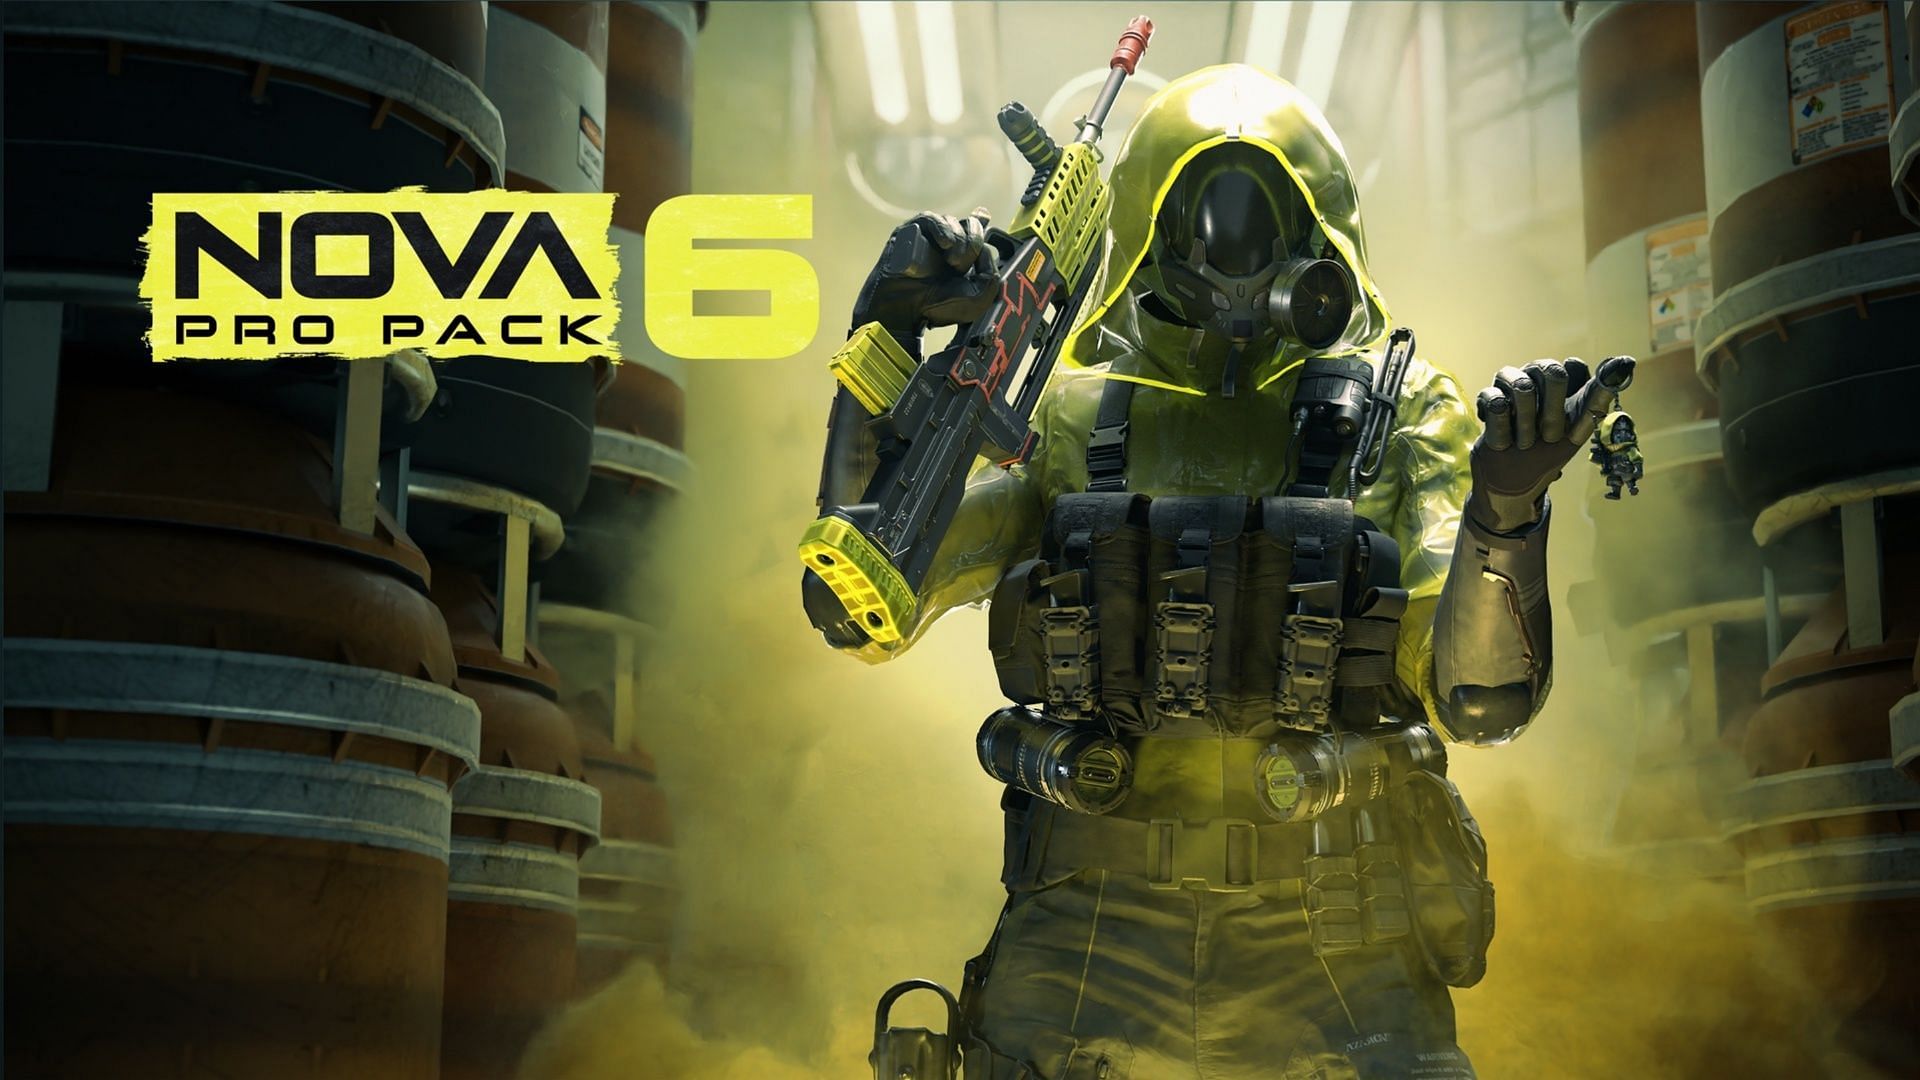 Nova 6 Pro Pack in MW3 and Warzone (Image via Activision)